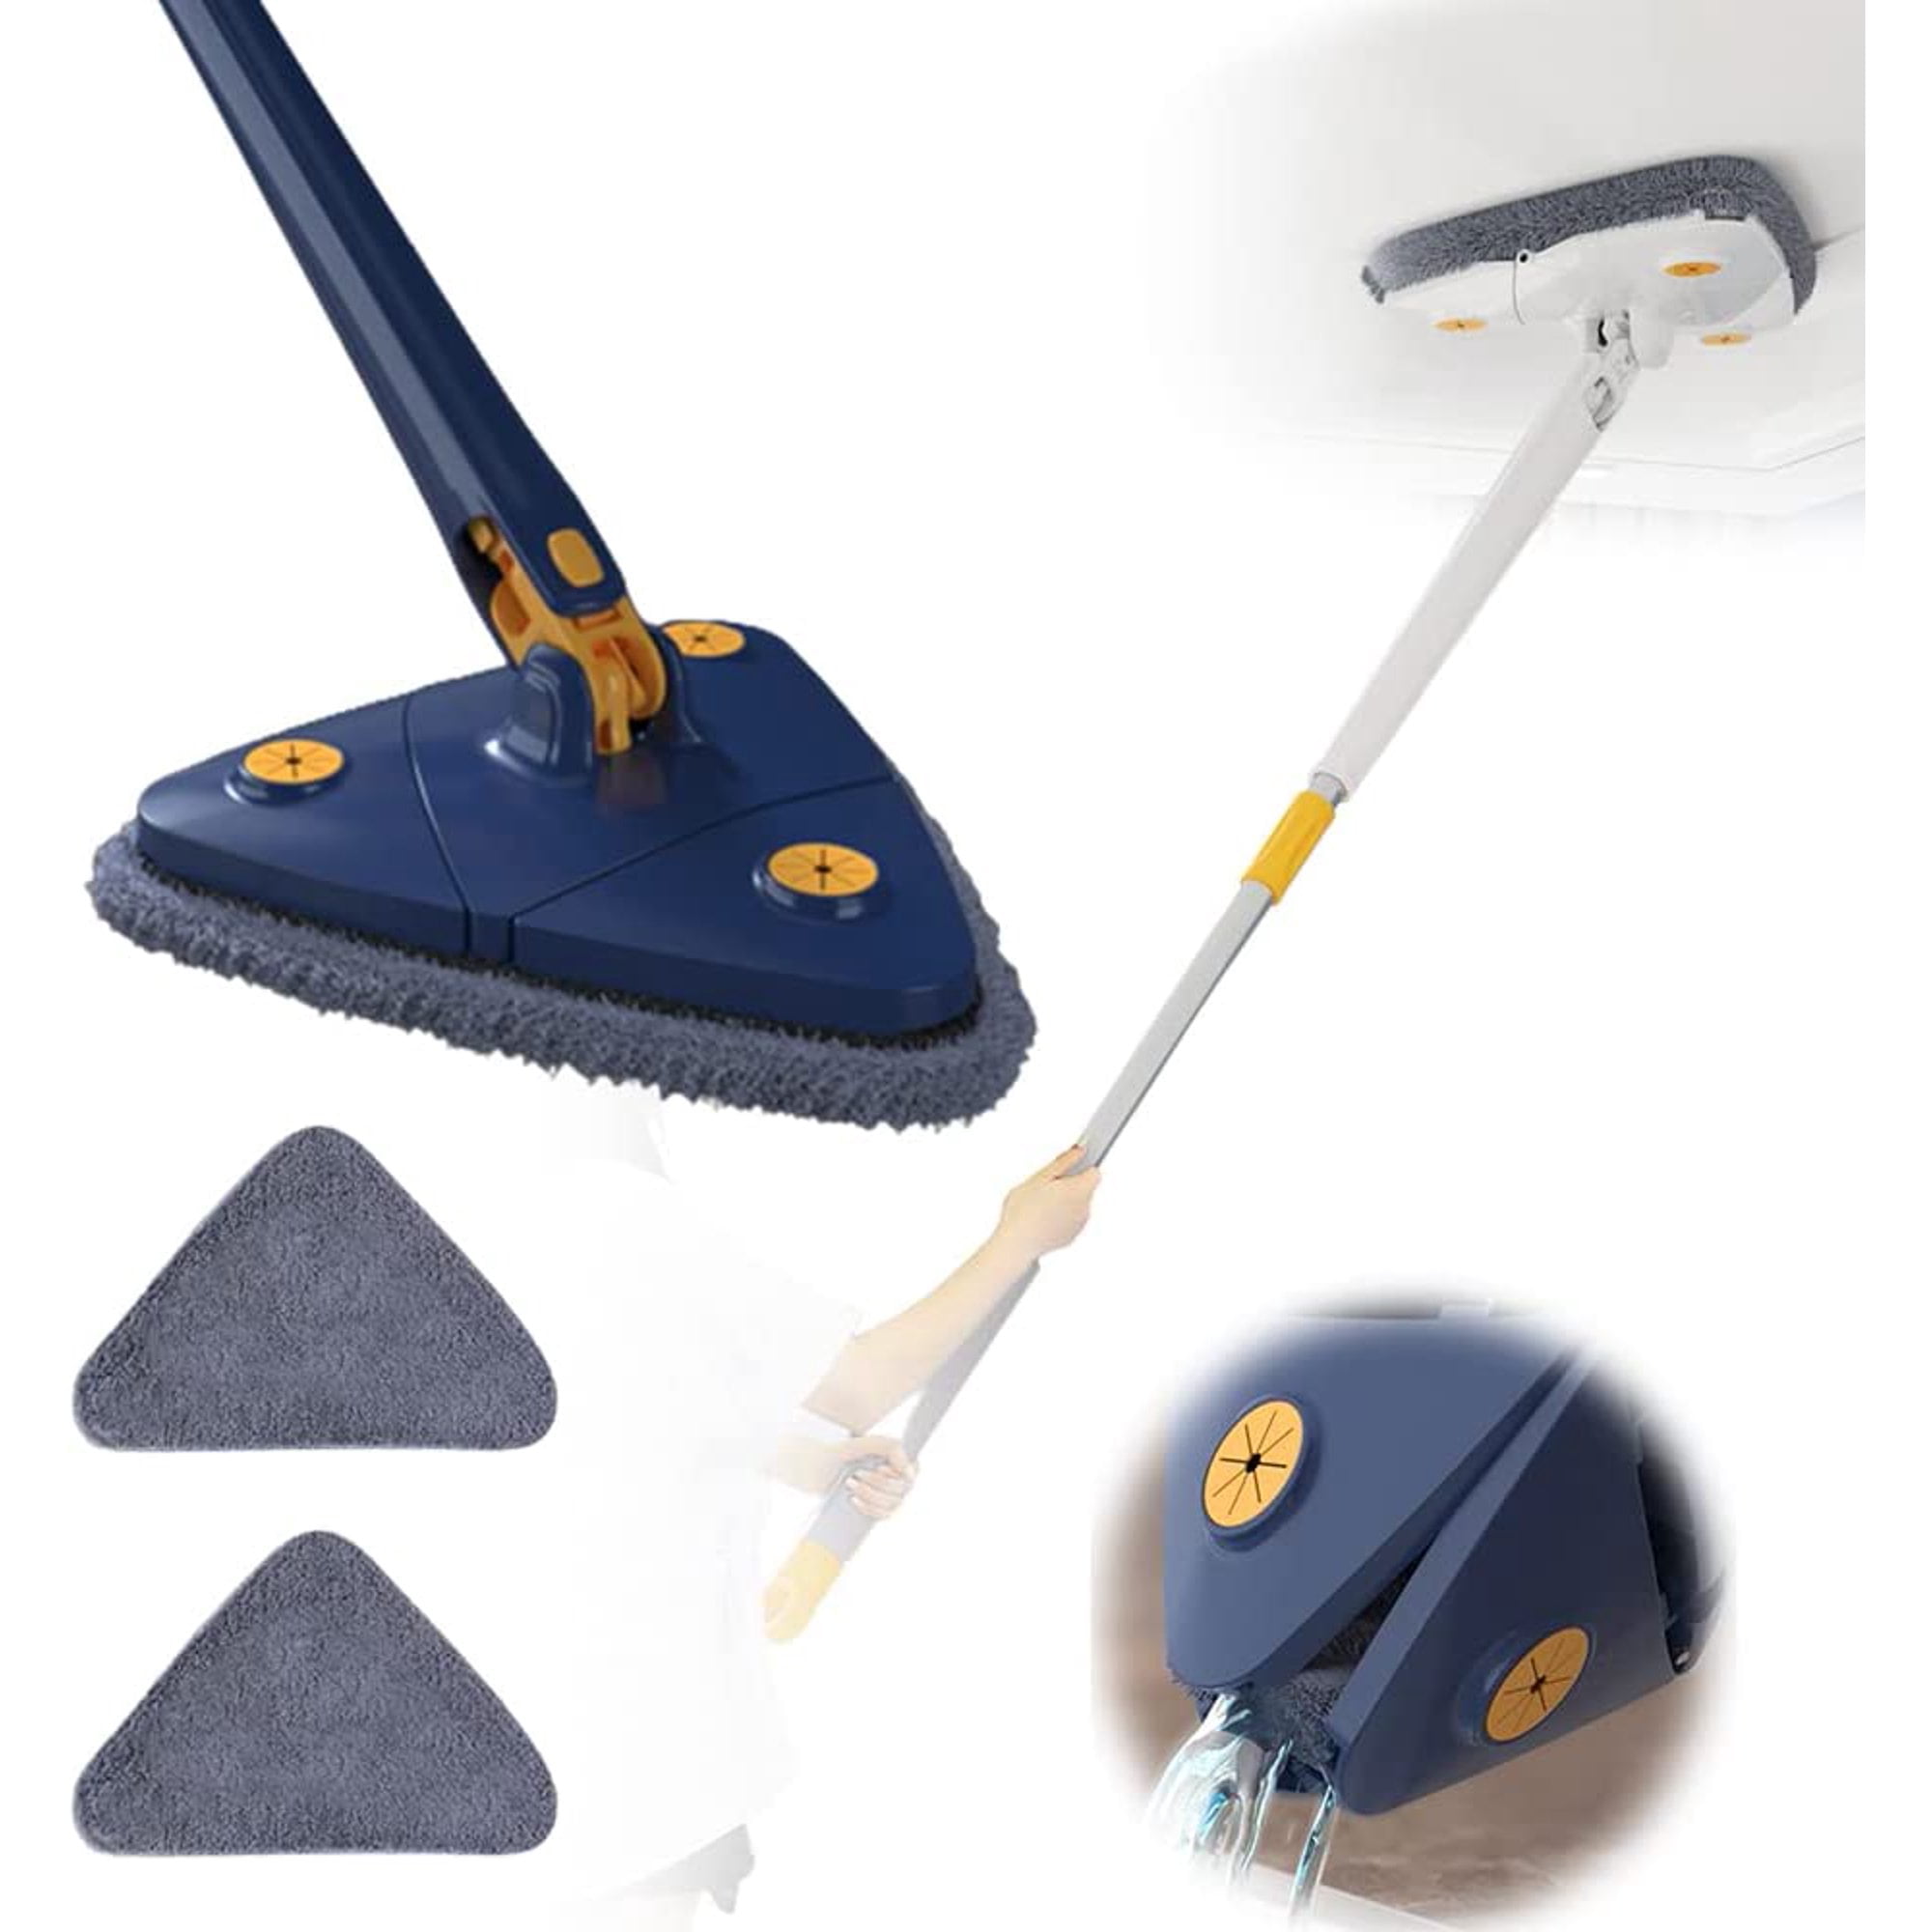 Cleaning Mop 360° Rotatable Adjustable Cleaning Mop Push-Pull